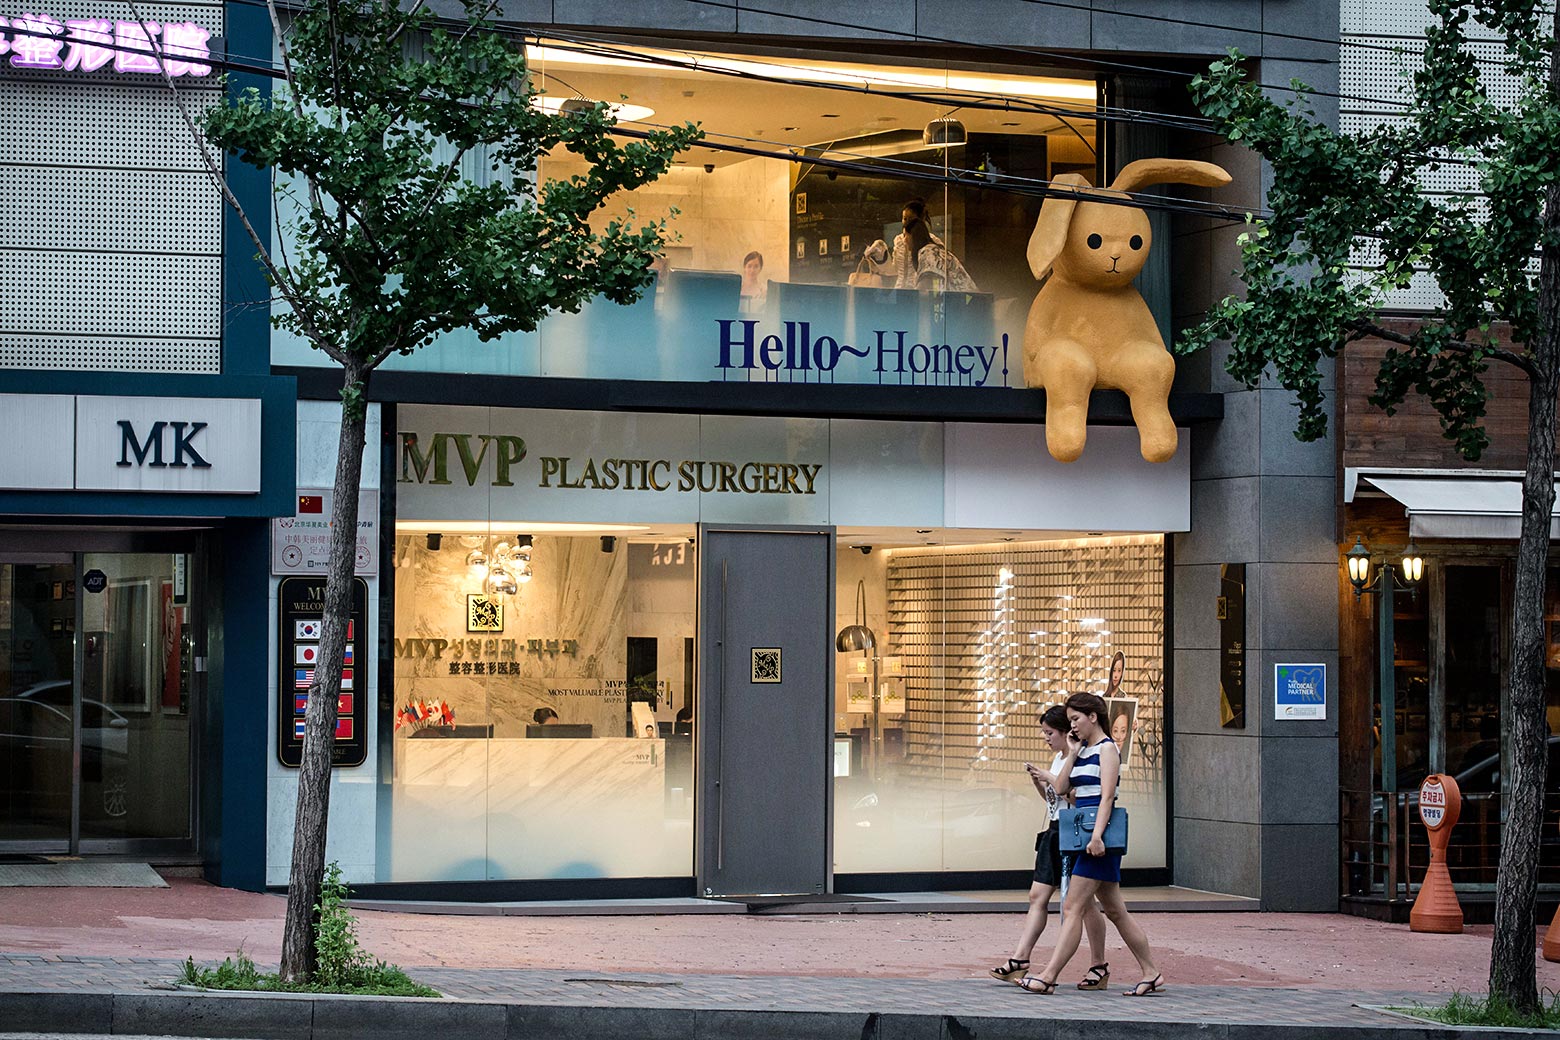 A storefront that says "Hello honey!" in large letters with a stuffed bunny sitting on the window sill, and below that, "MVP Plastic Surgery."